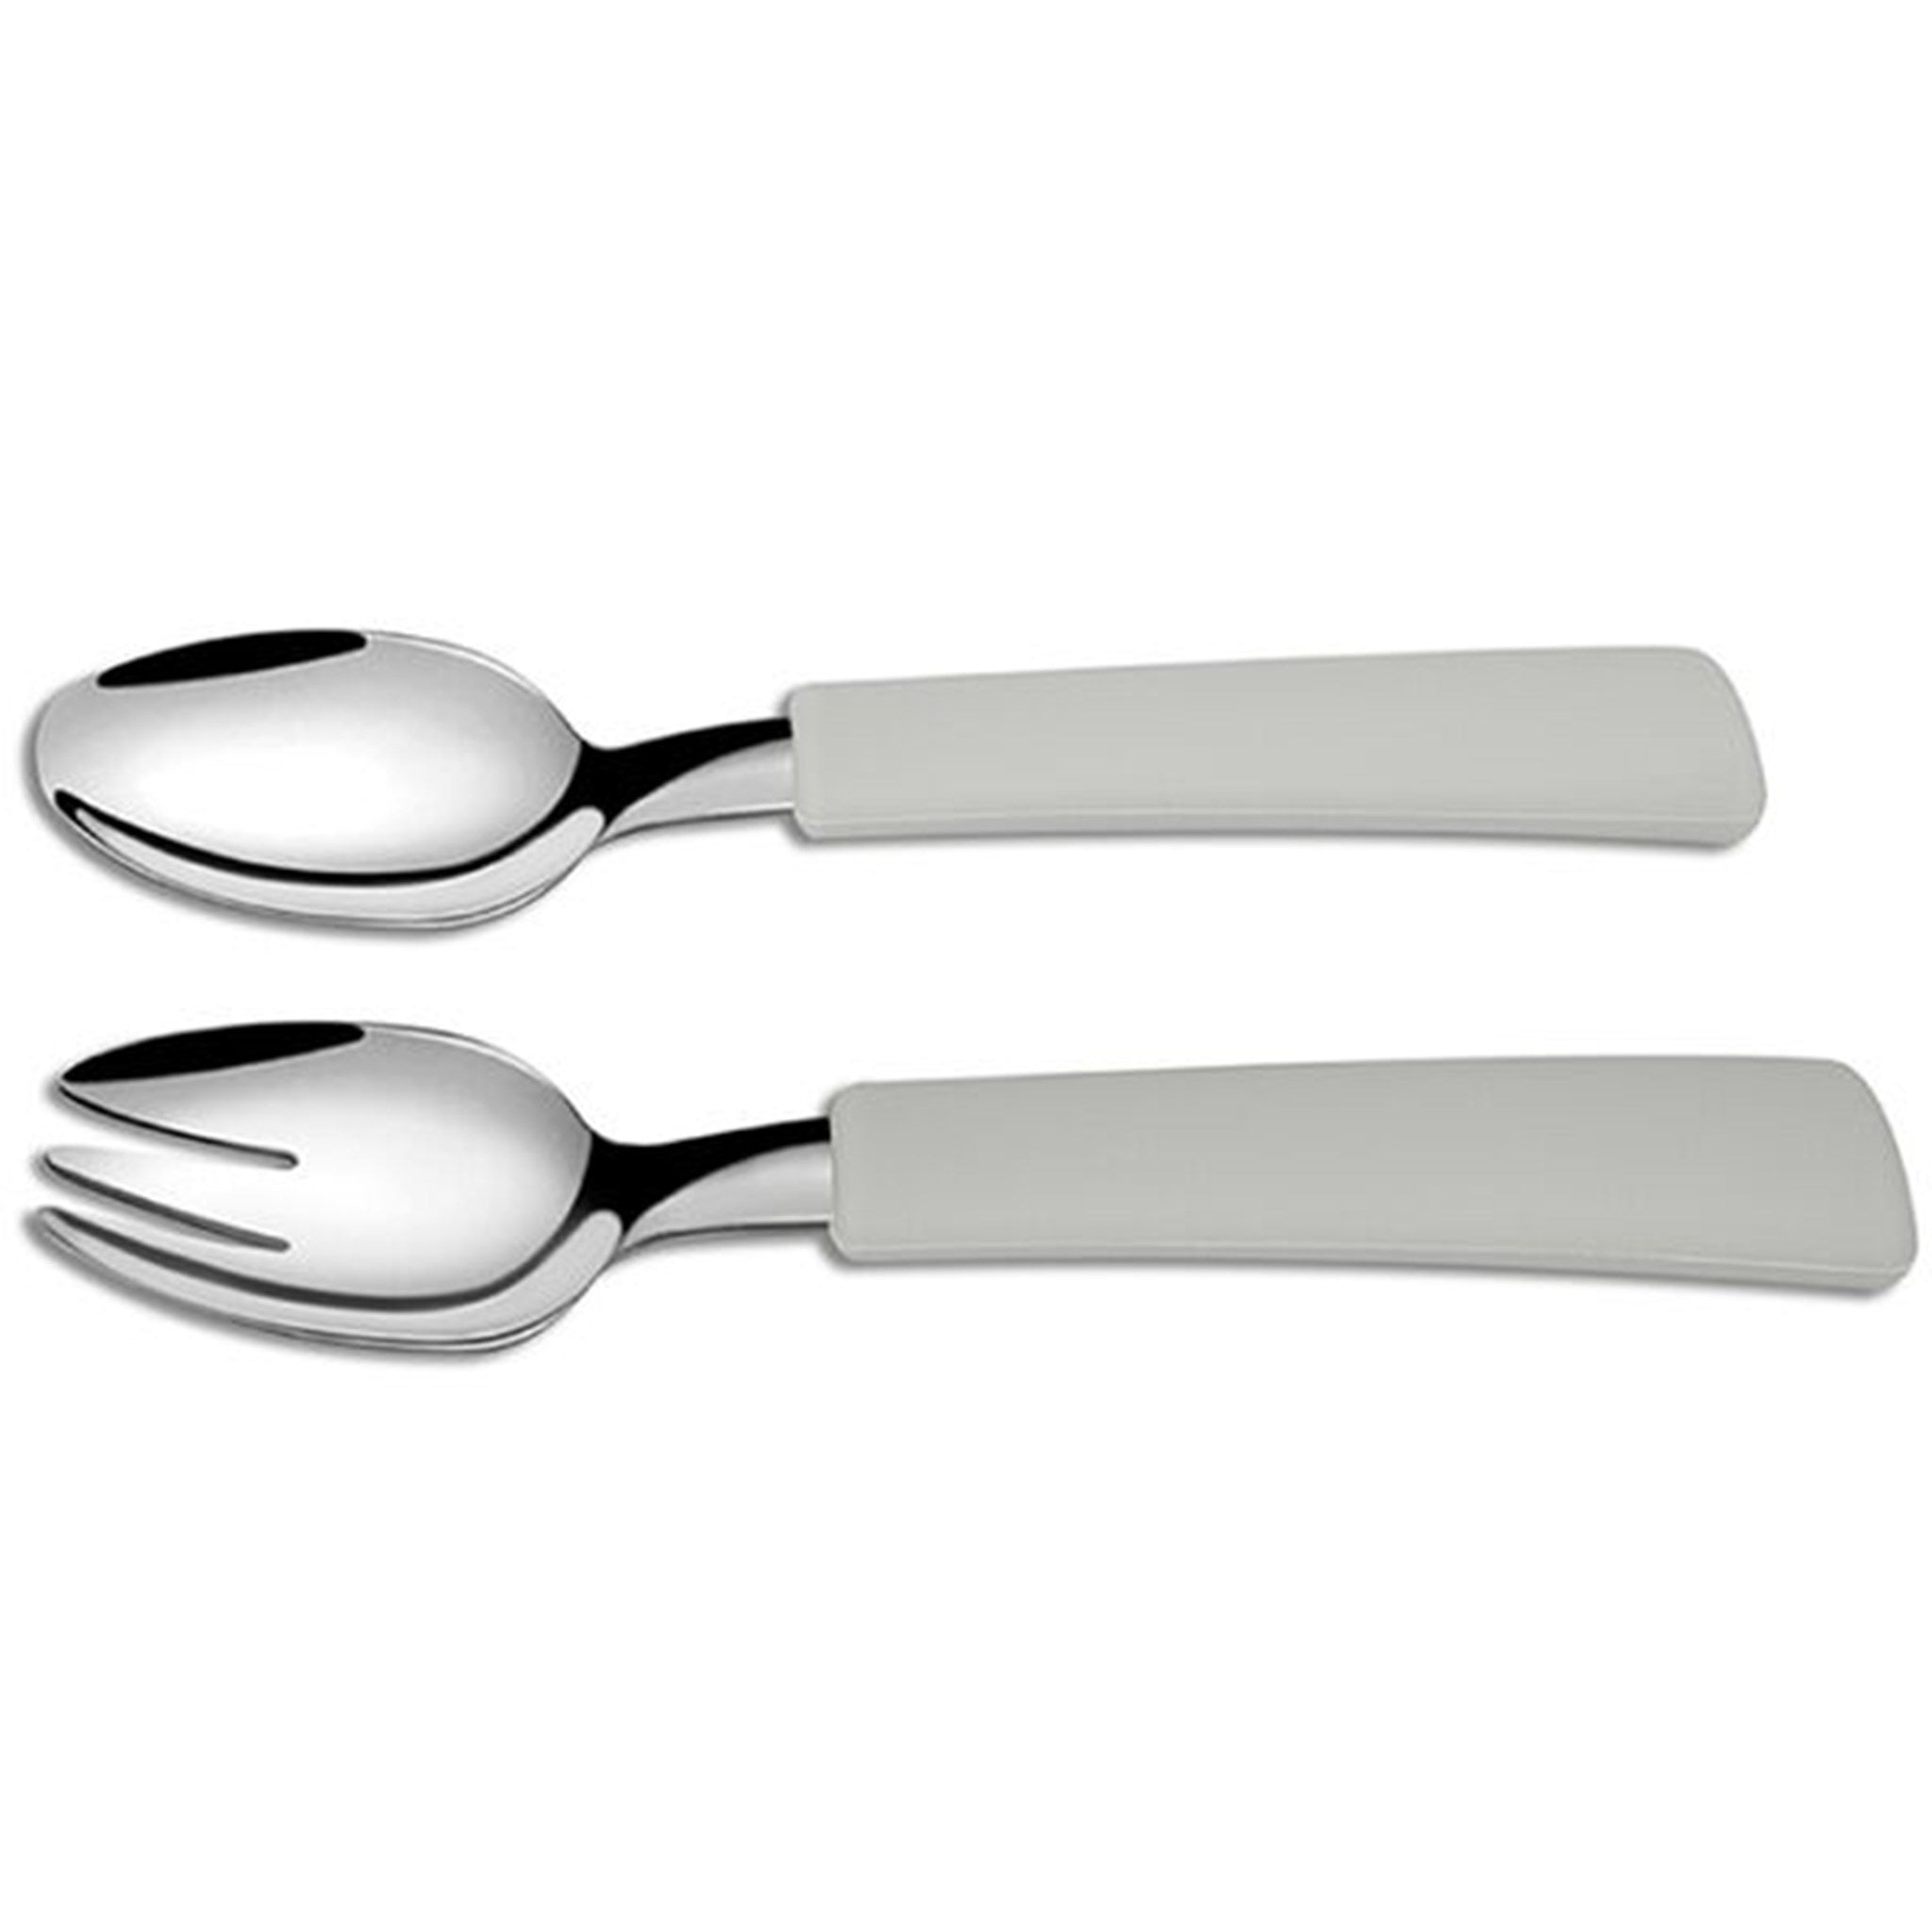 That's Mine Spoon and Fork Set Feather Grey